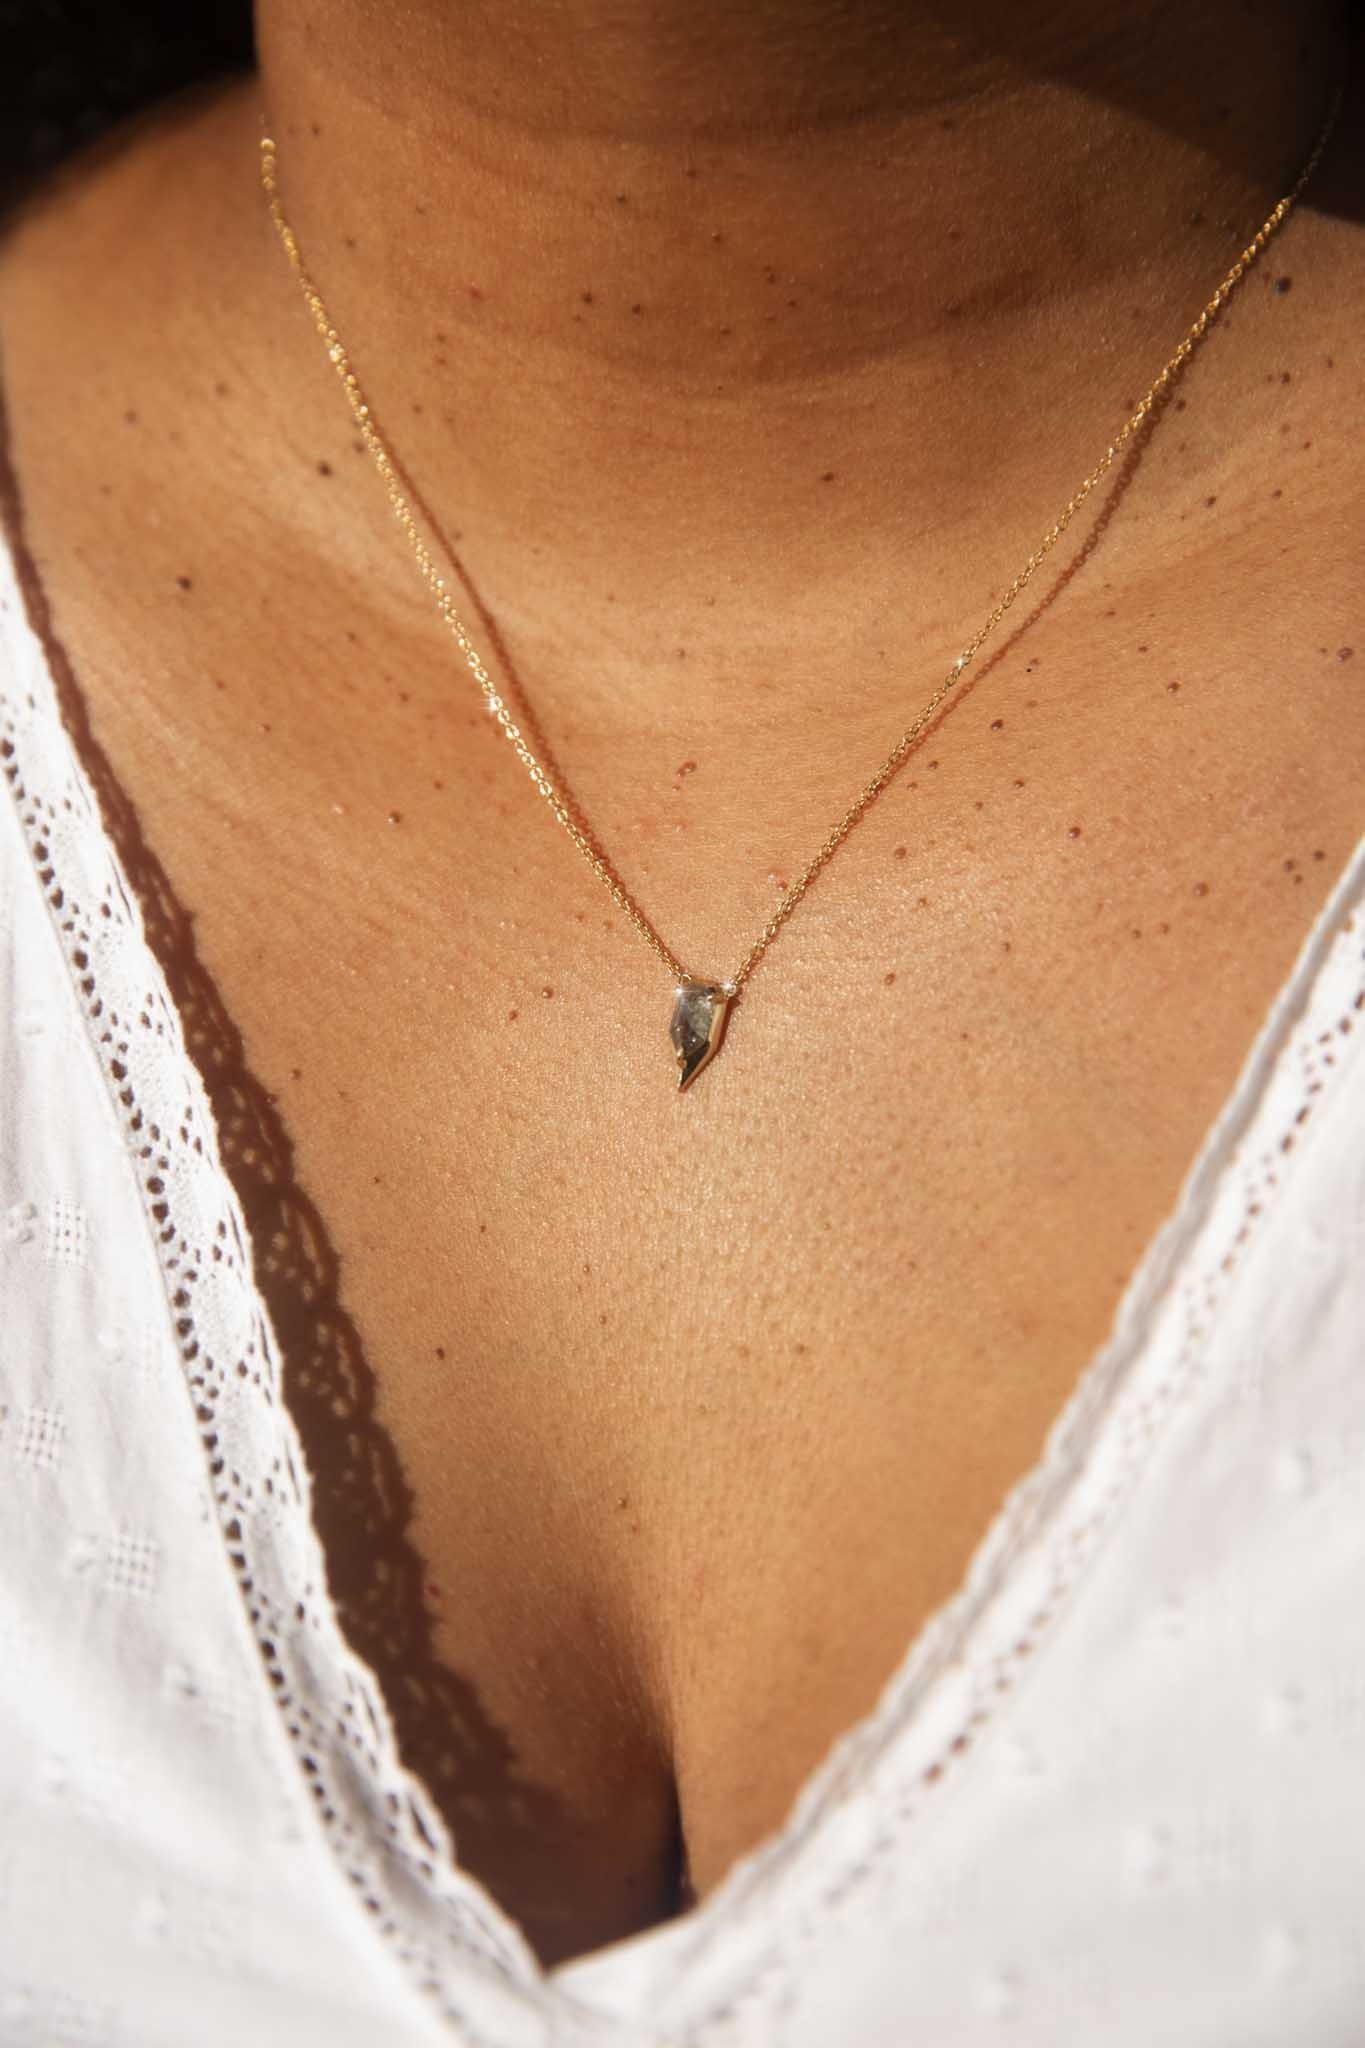 For the one who welcomes eccentricity and walks their own path. Crafted in 9 carat gold, The Ria Necklace is an intriguing piece. Her salt and pepper shield cut diamond is set in a sharp arrowhead of polished gold and unafraid of her imperfections,